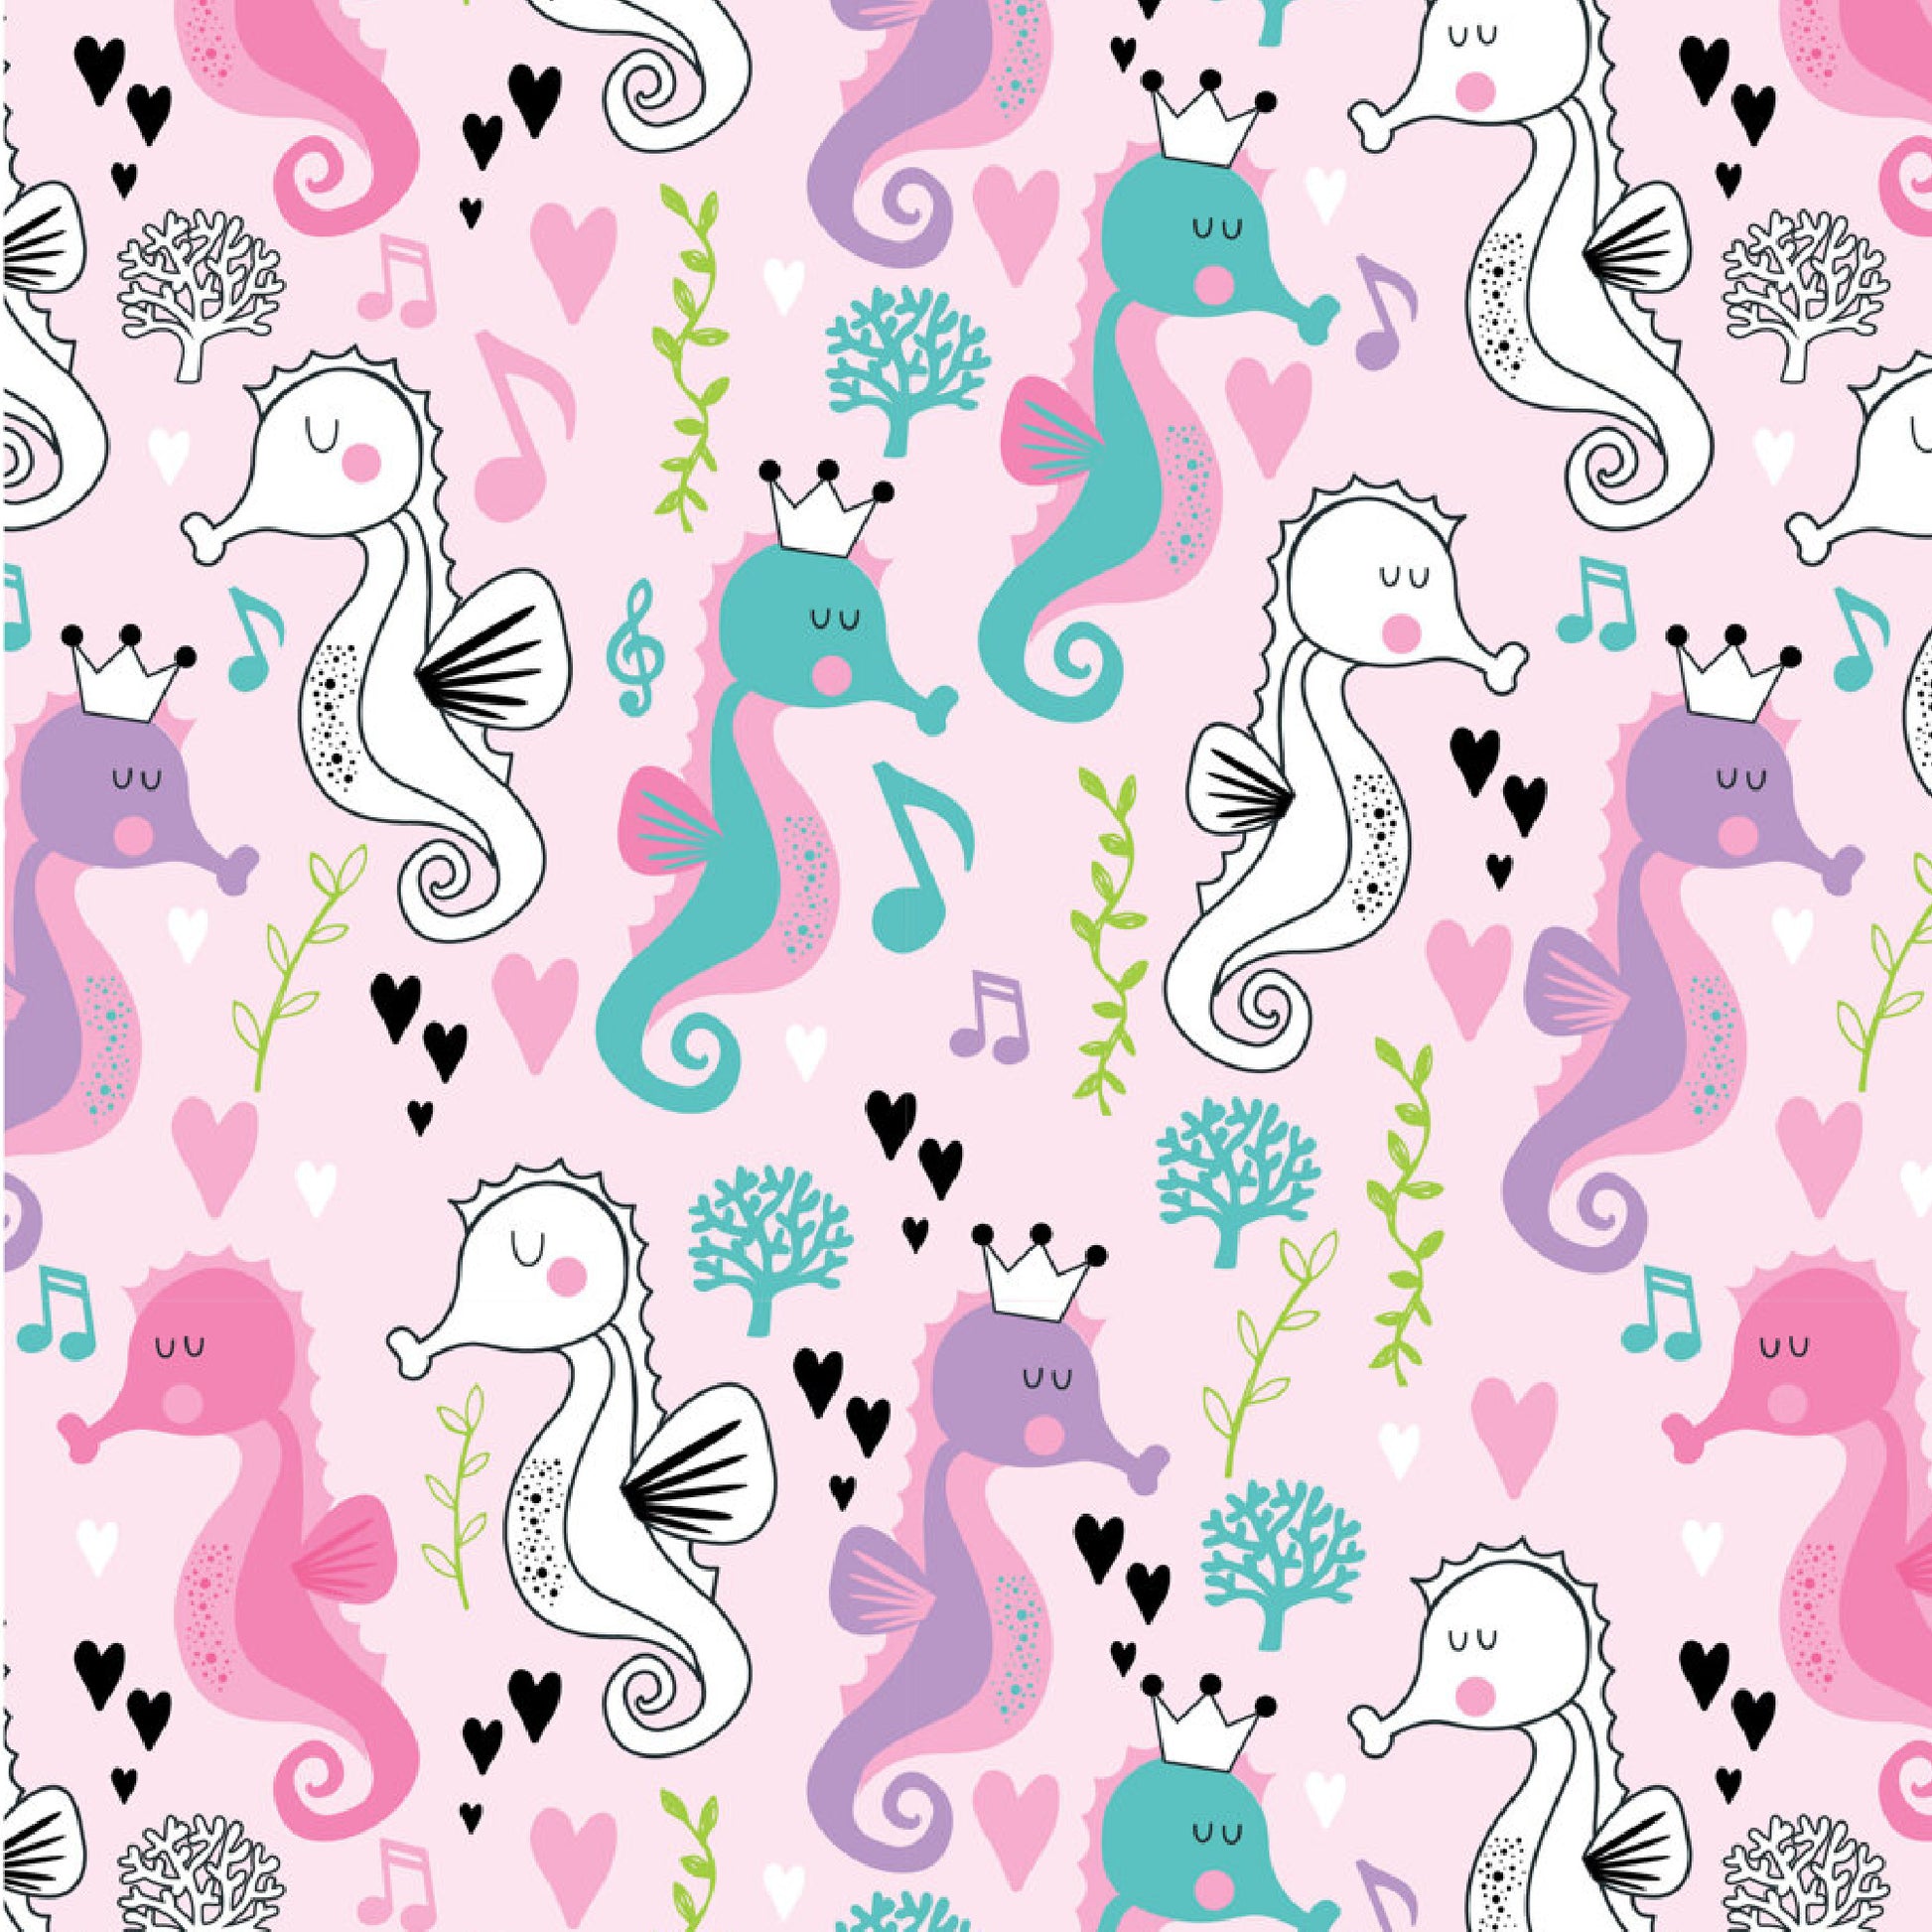 Sweet Little Seahorses on Pink - Weave & Woven